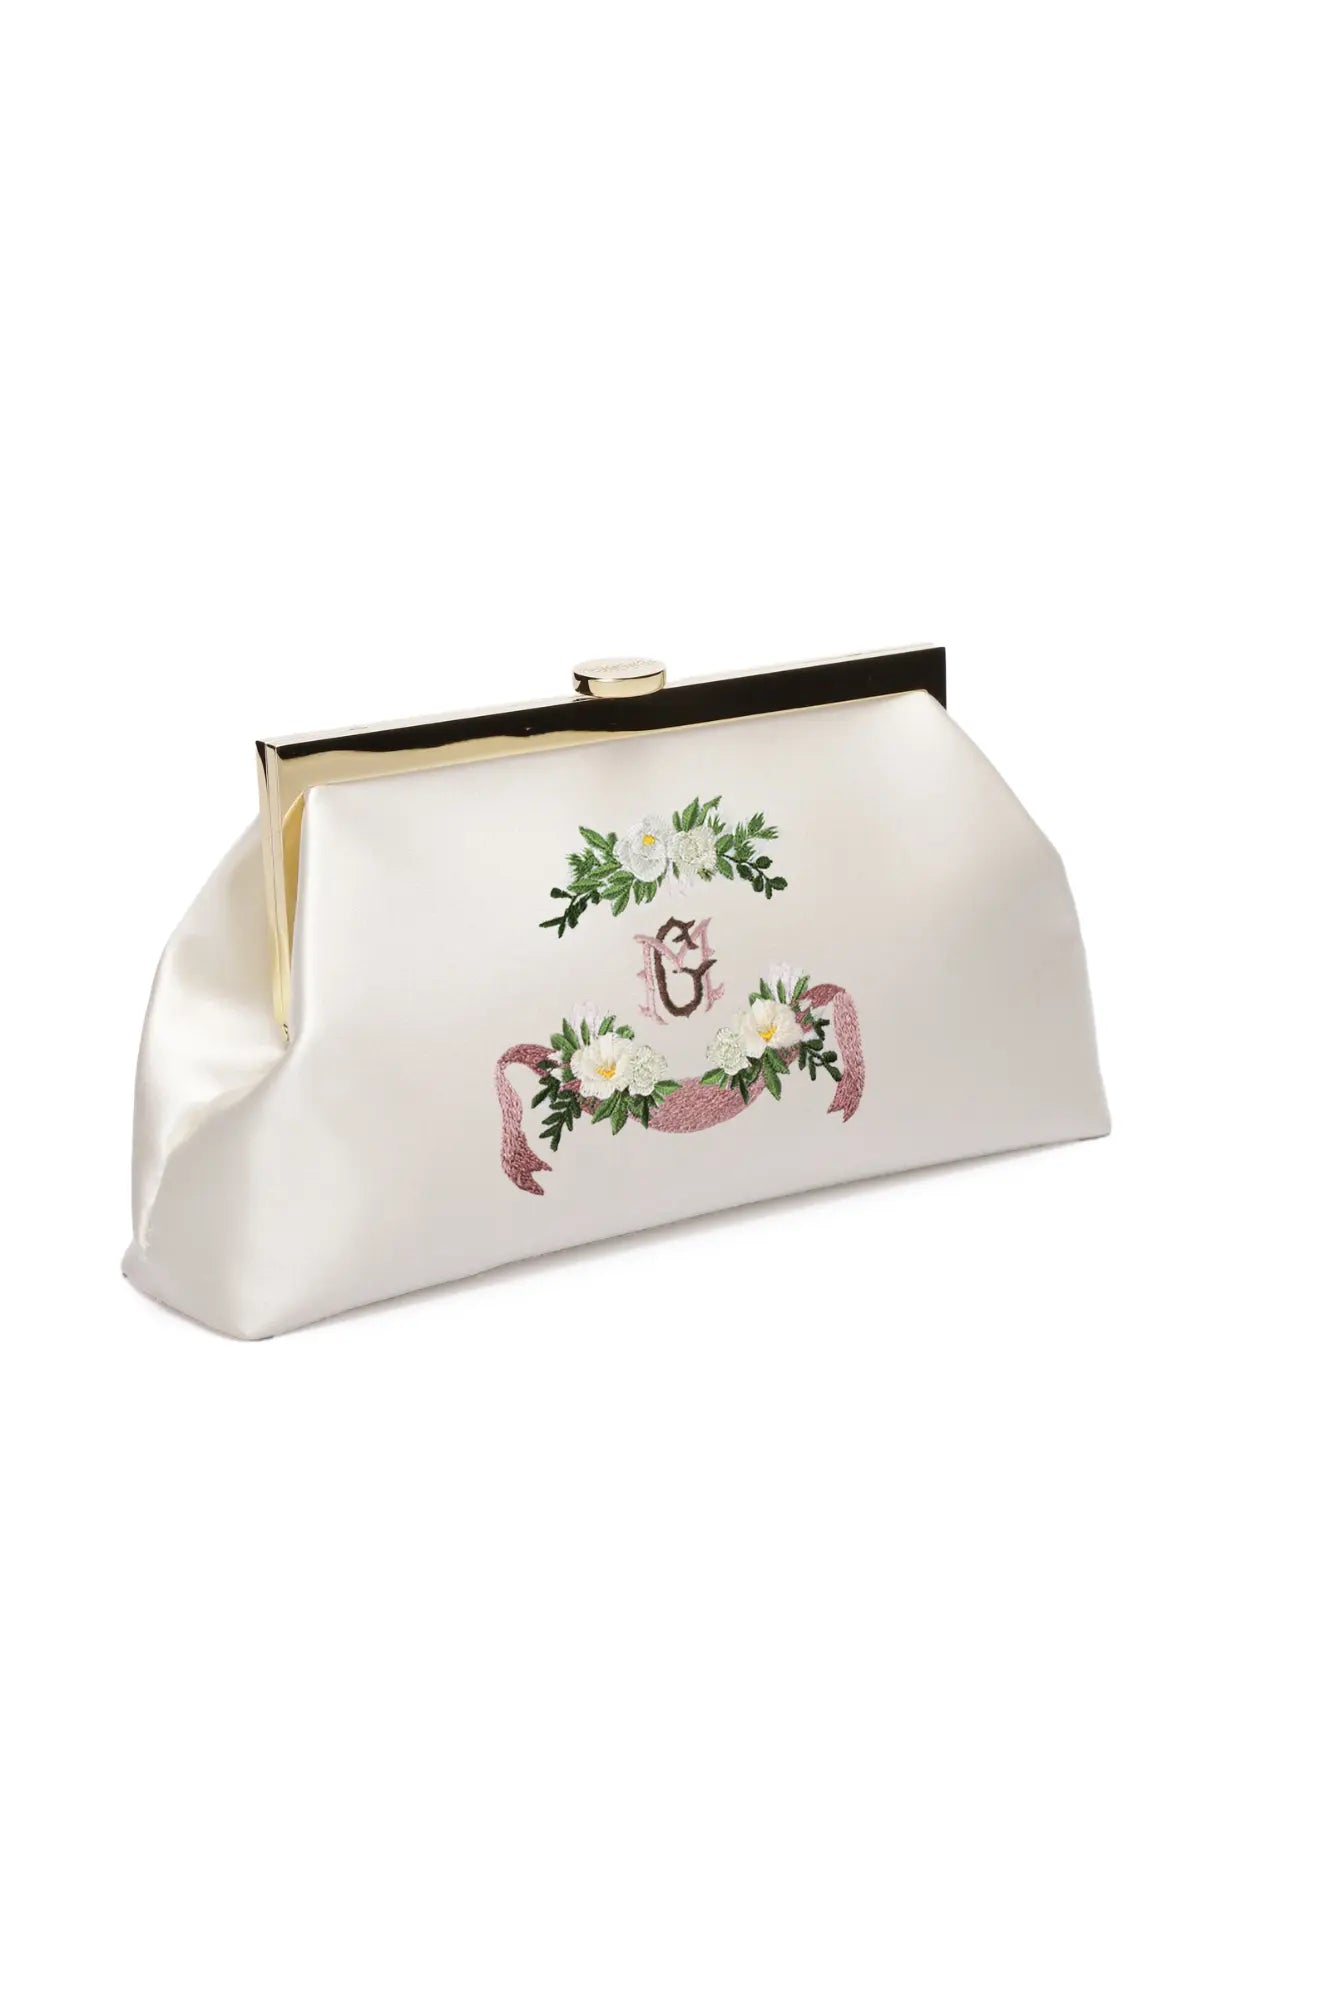 Elegant white Rosa Clutch Monogram Embroidery from The Bella Rosa Collection with floral embroidery and a gold clasp.